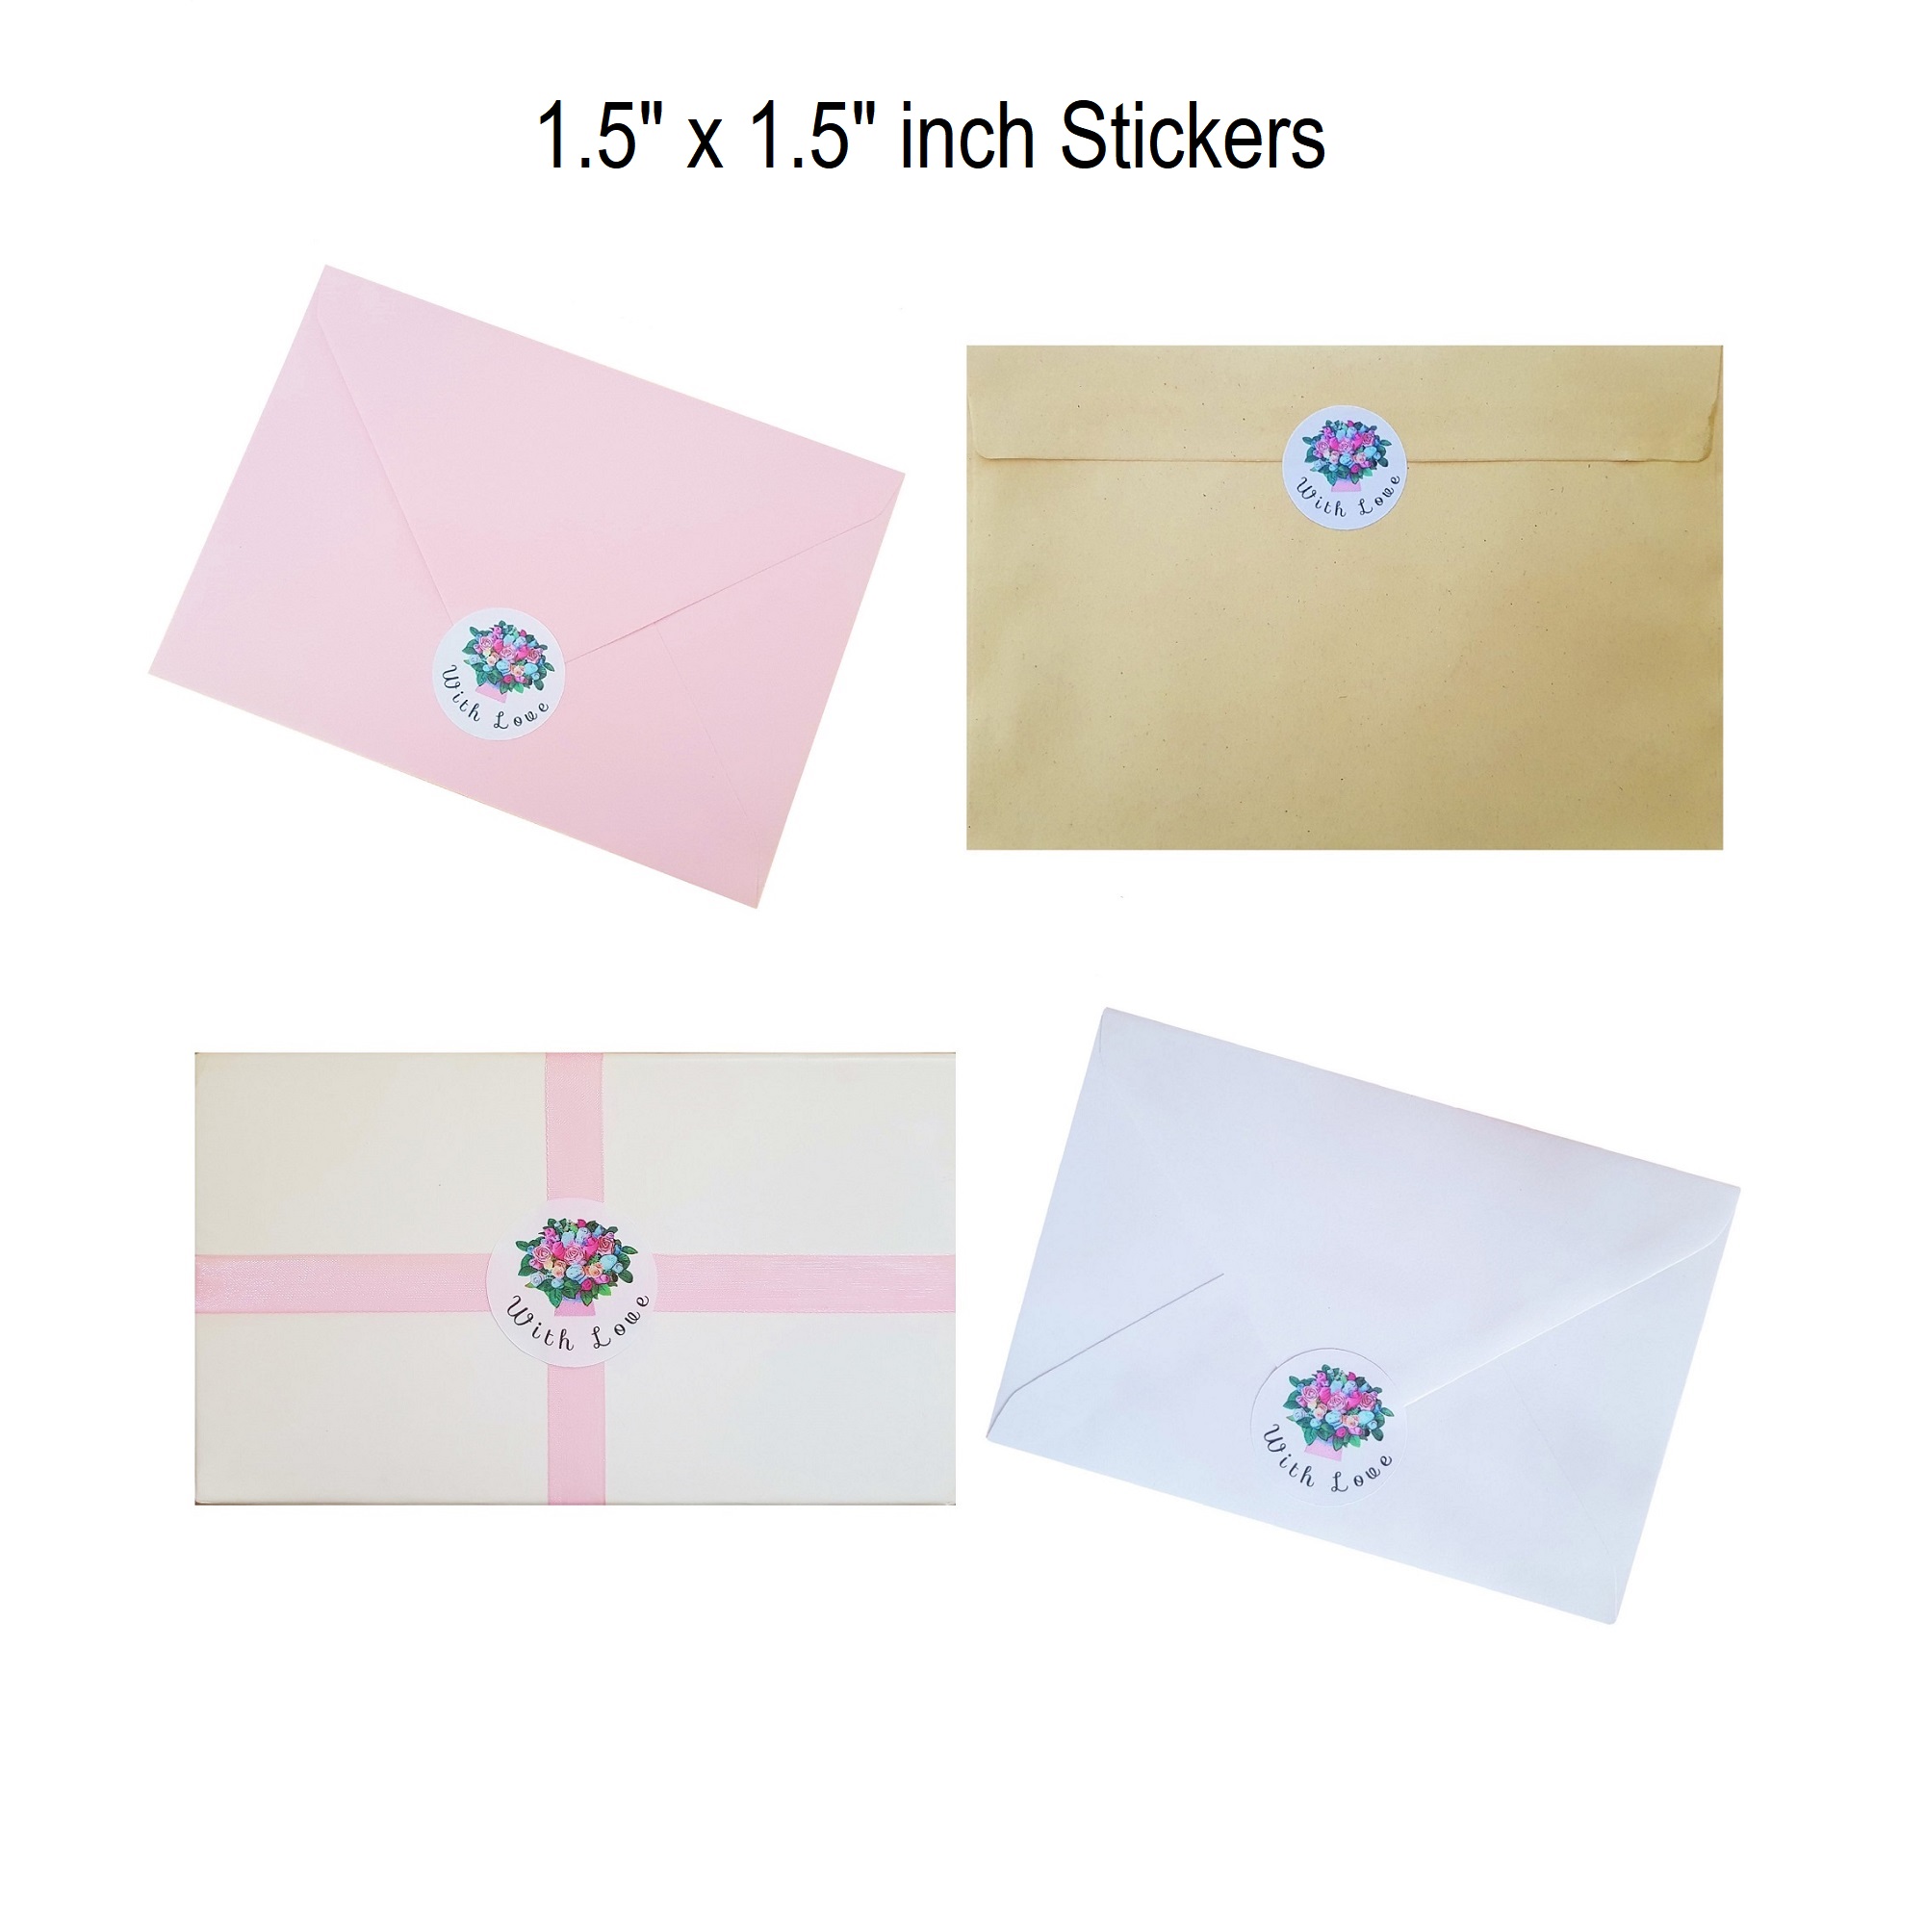 "With Love" Stickers - Pink Floral Bouquet